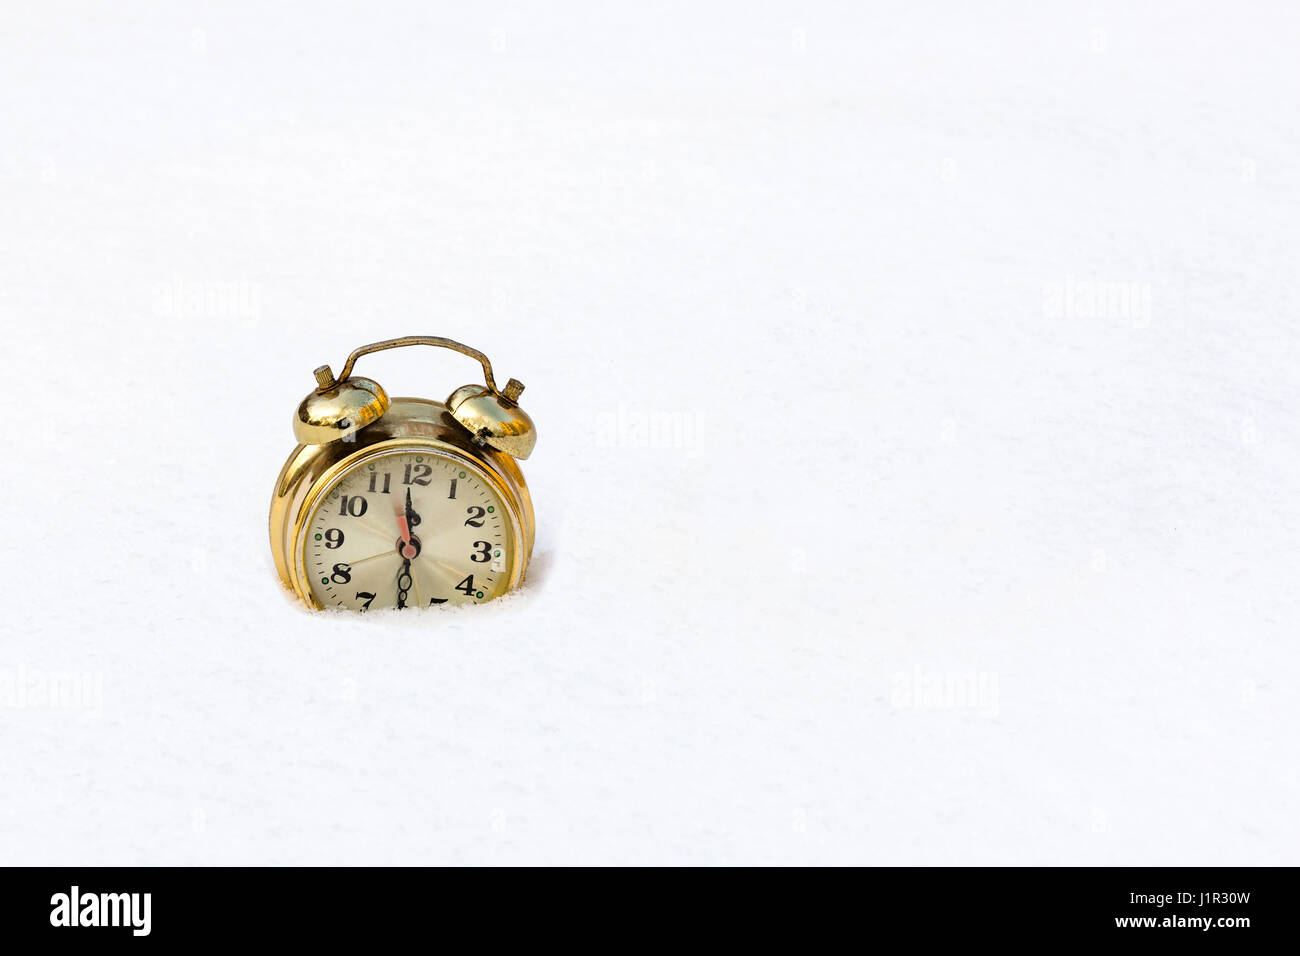 gold watch on a pure white snow Stock Photo